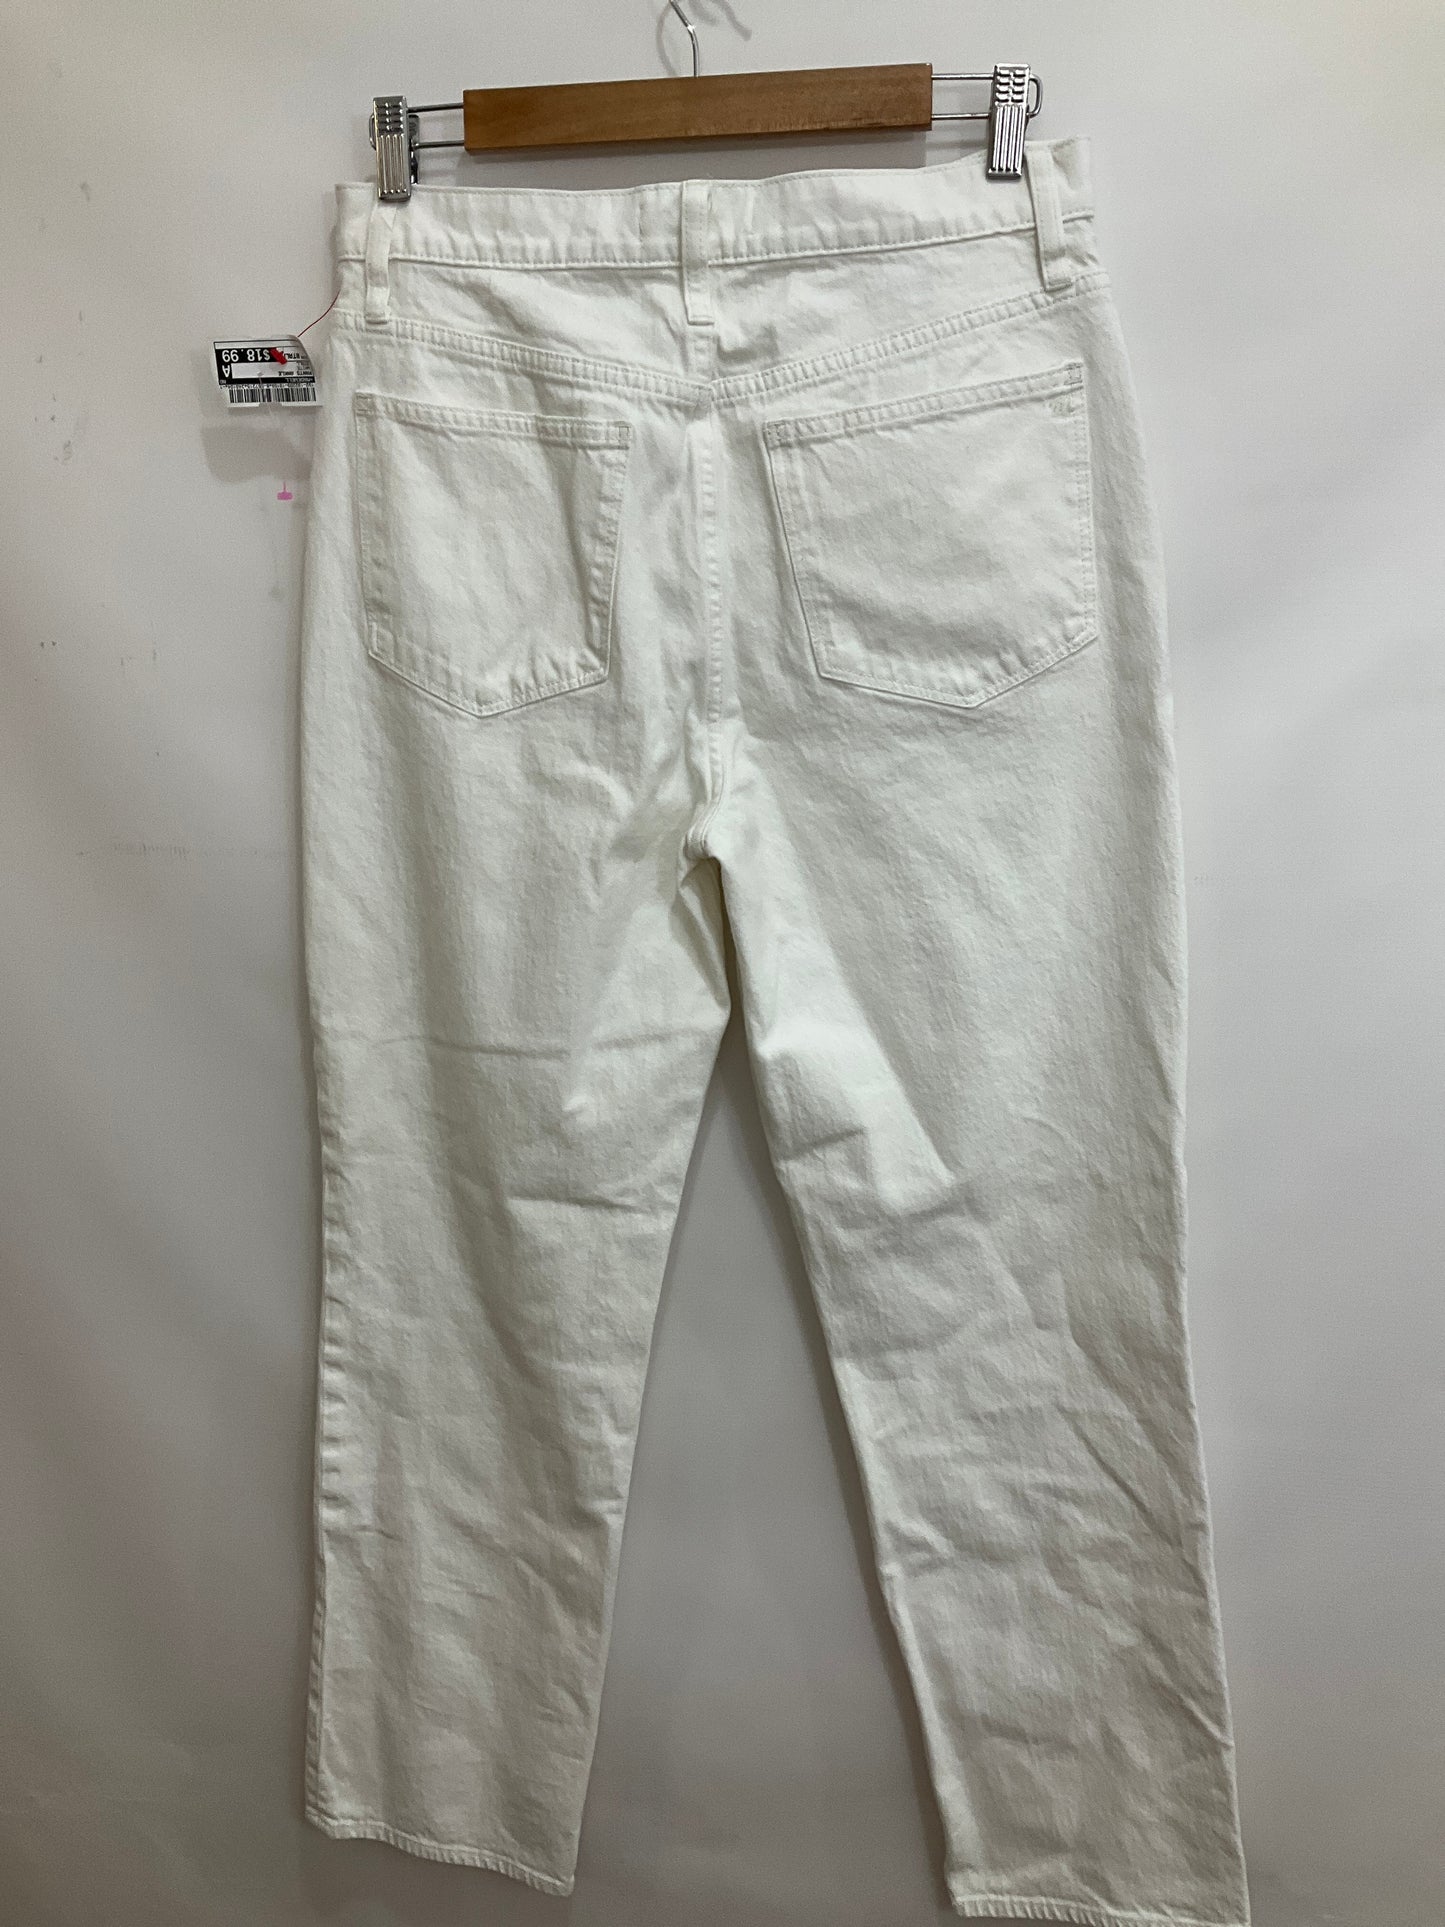 Pants Ankle By Madewell  Size: 8tall